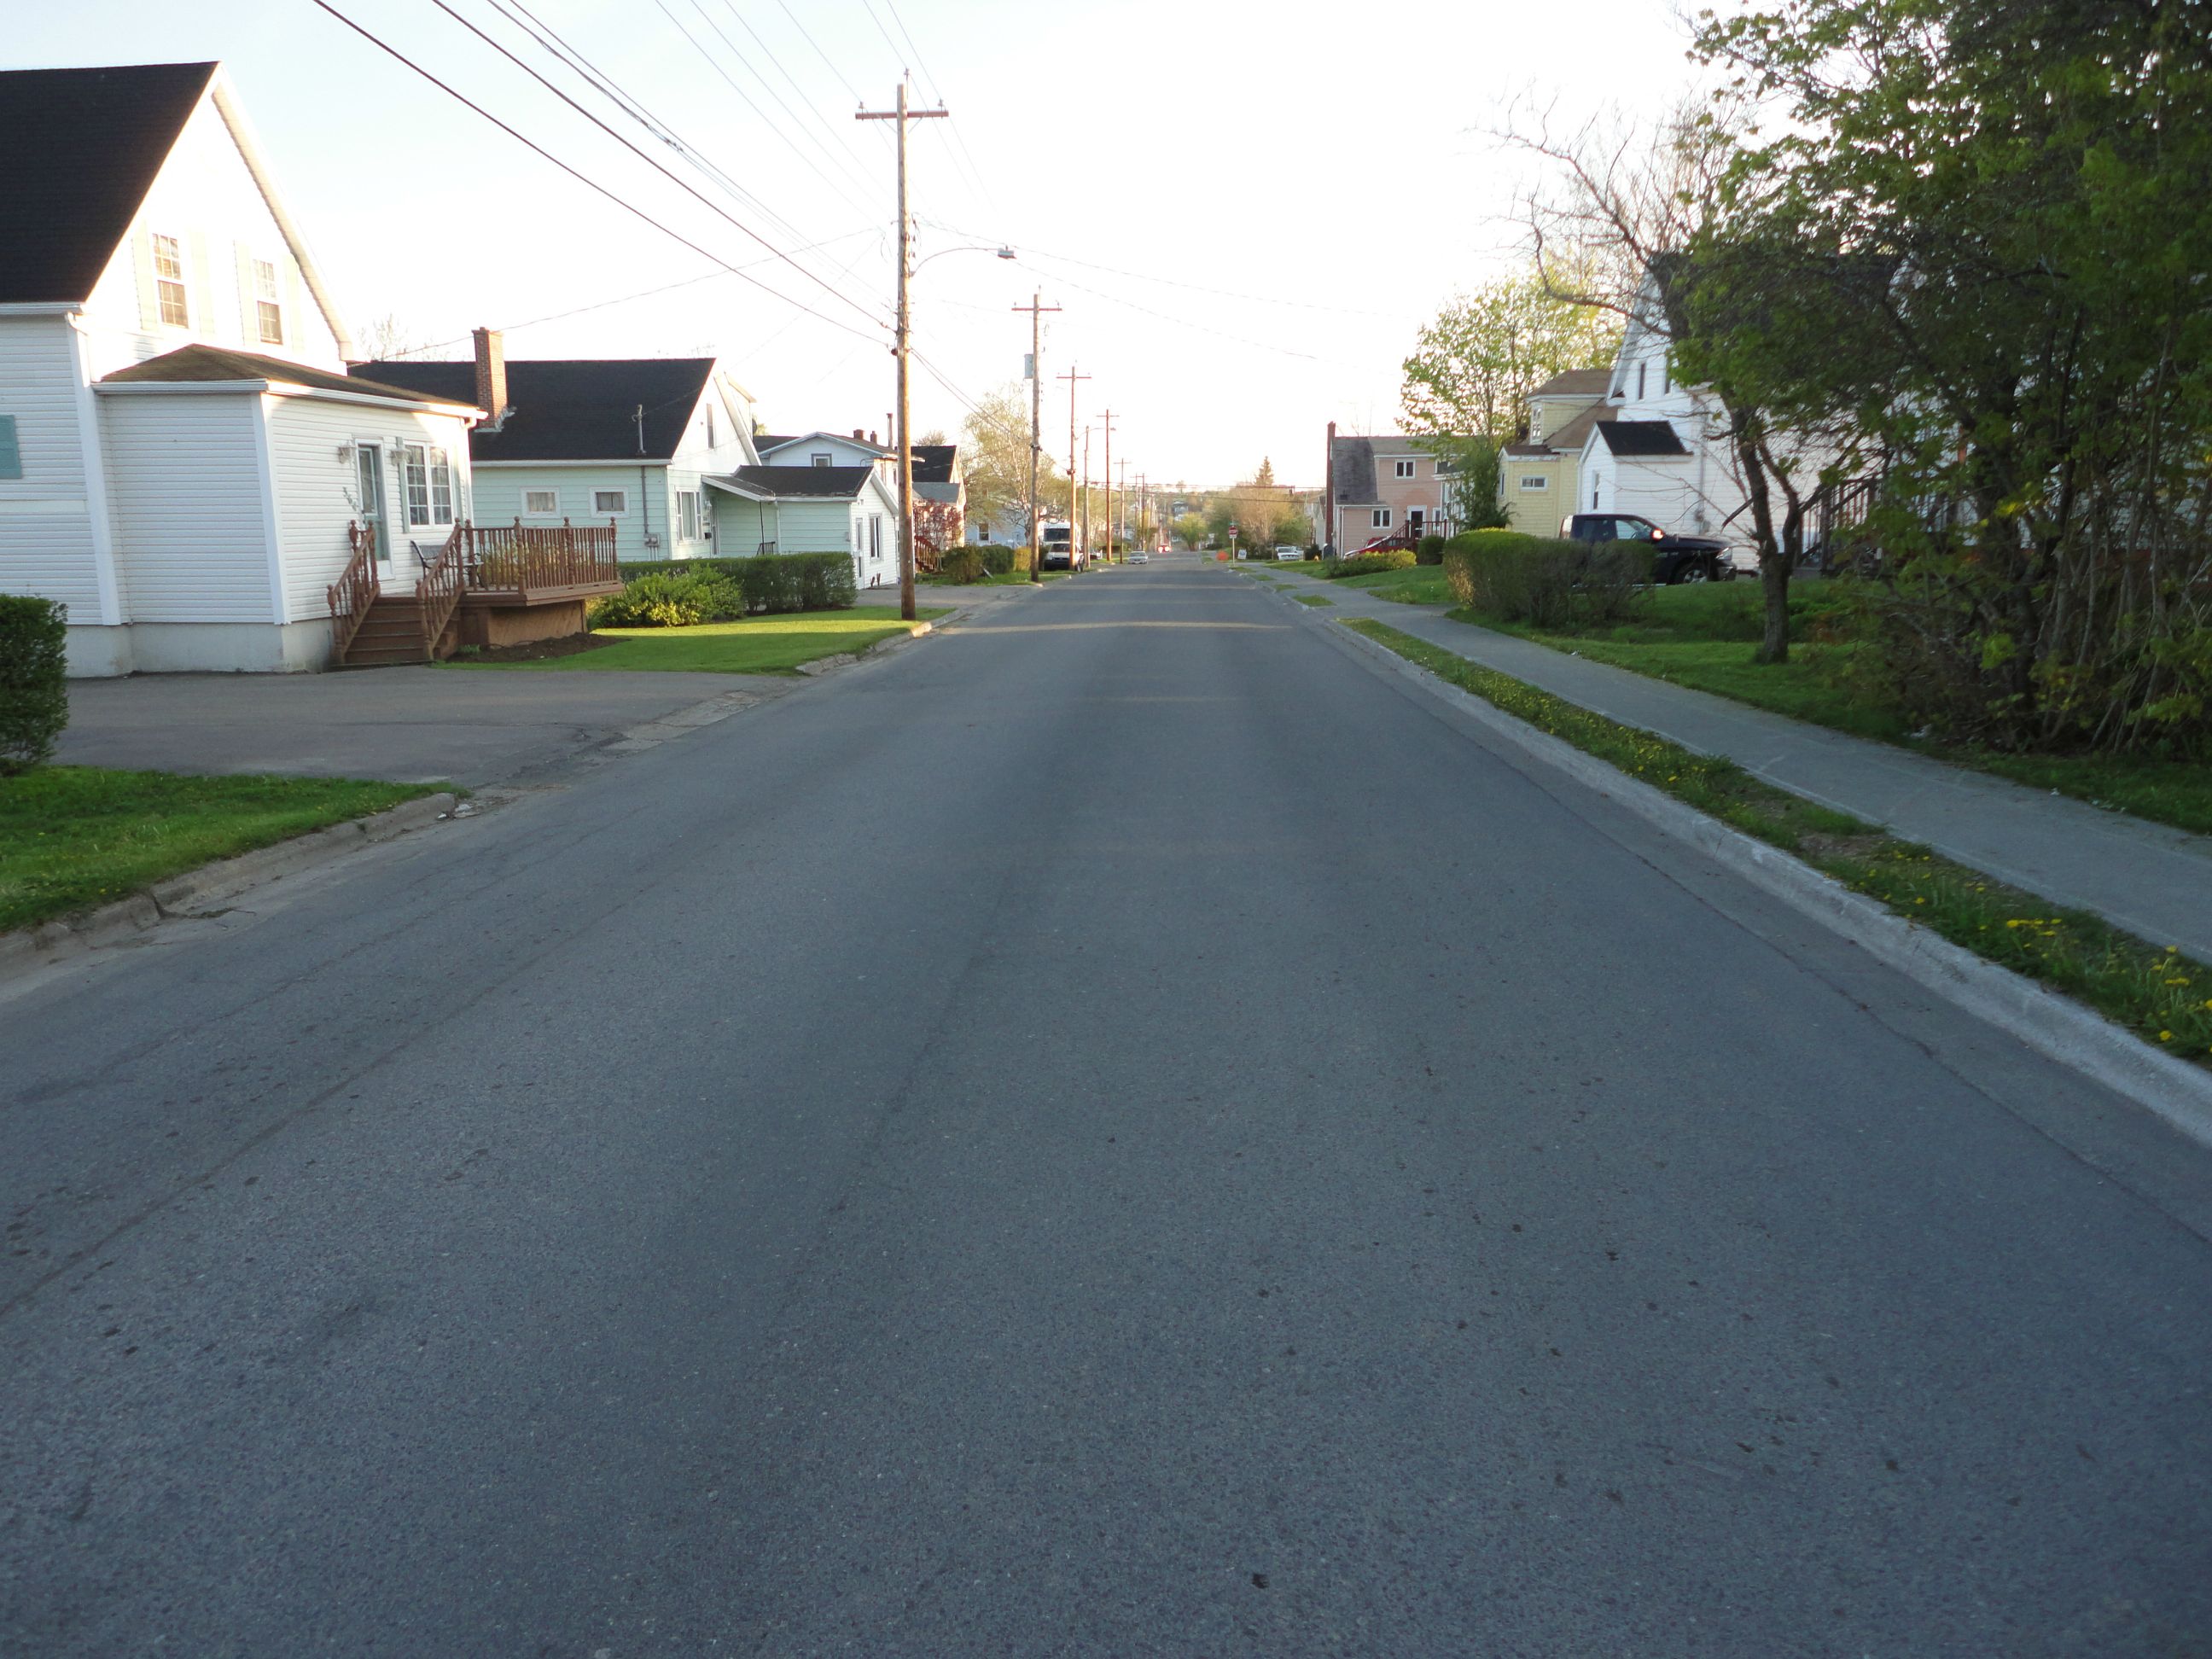 Cabot Street is Heading towards Cottage Road and the Grass is Green in late spring.